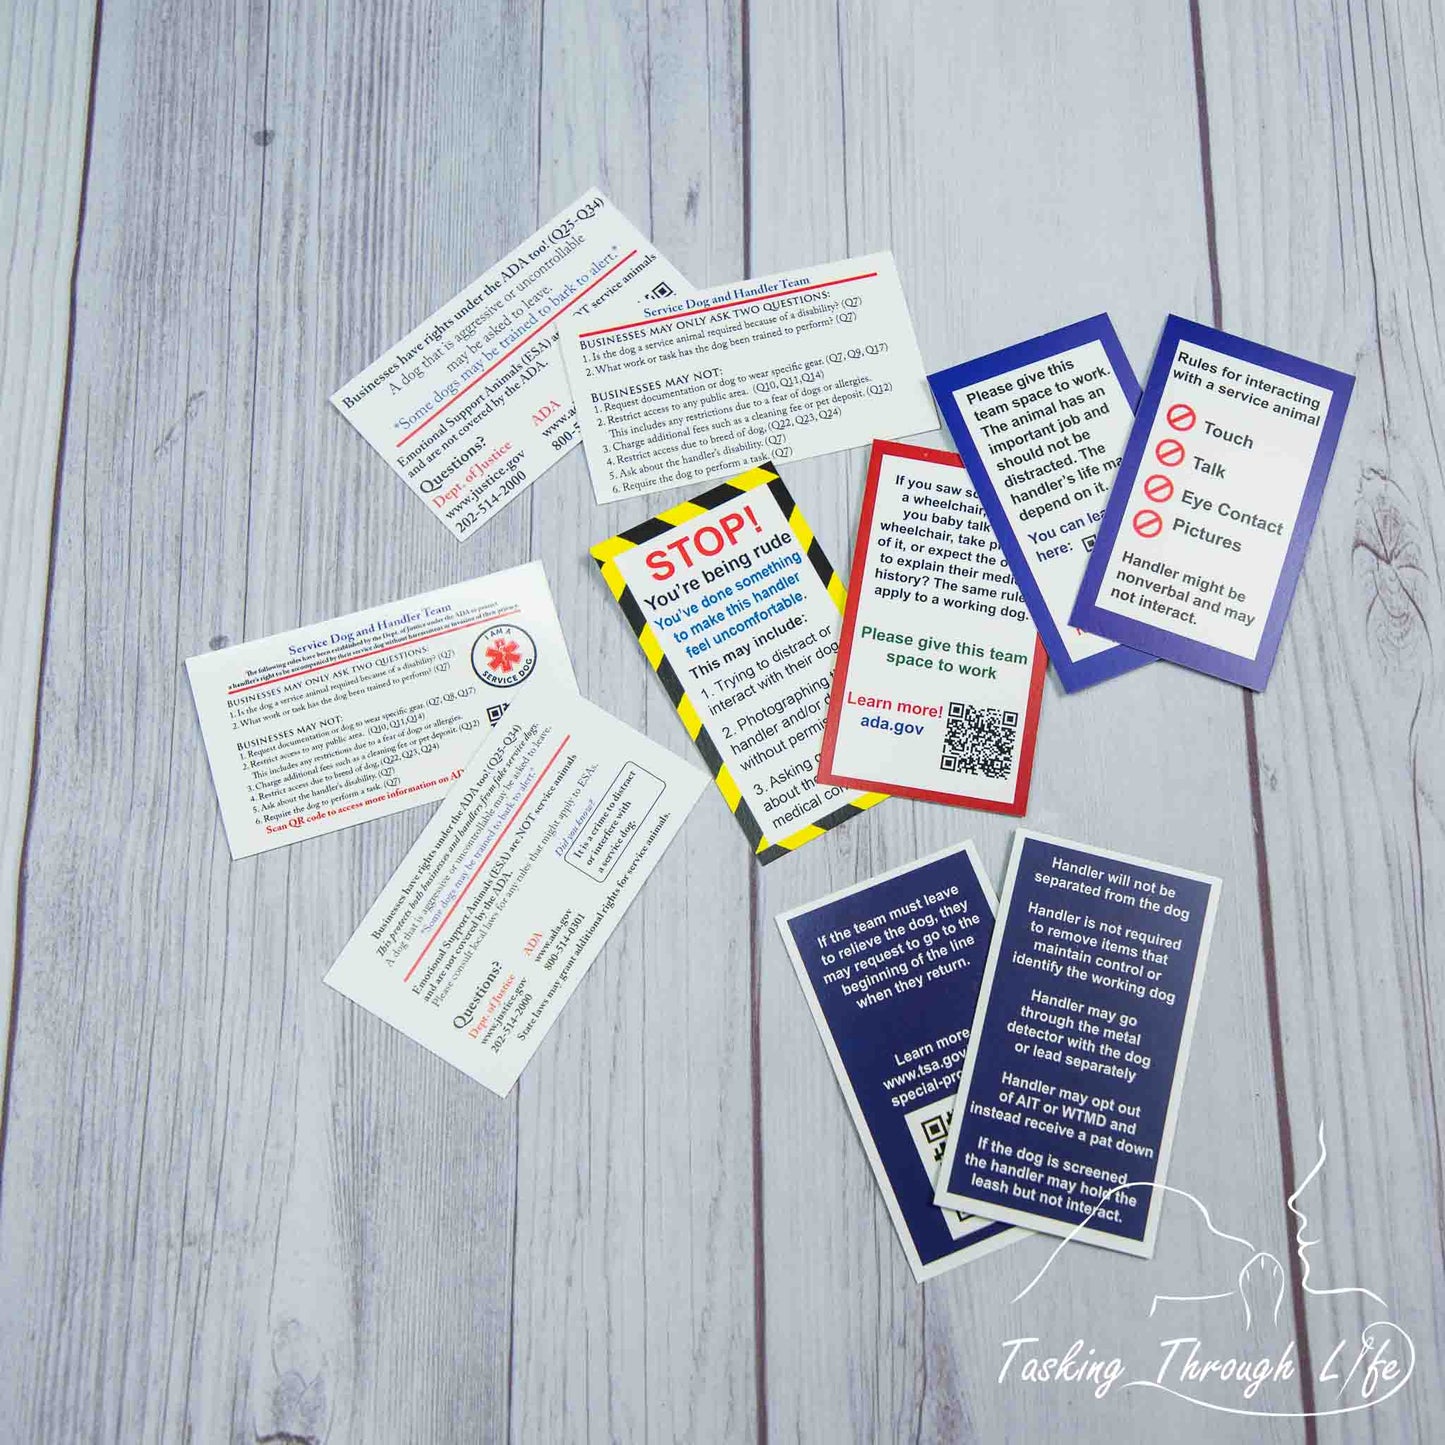 Mix and Match Cards